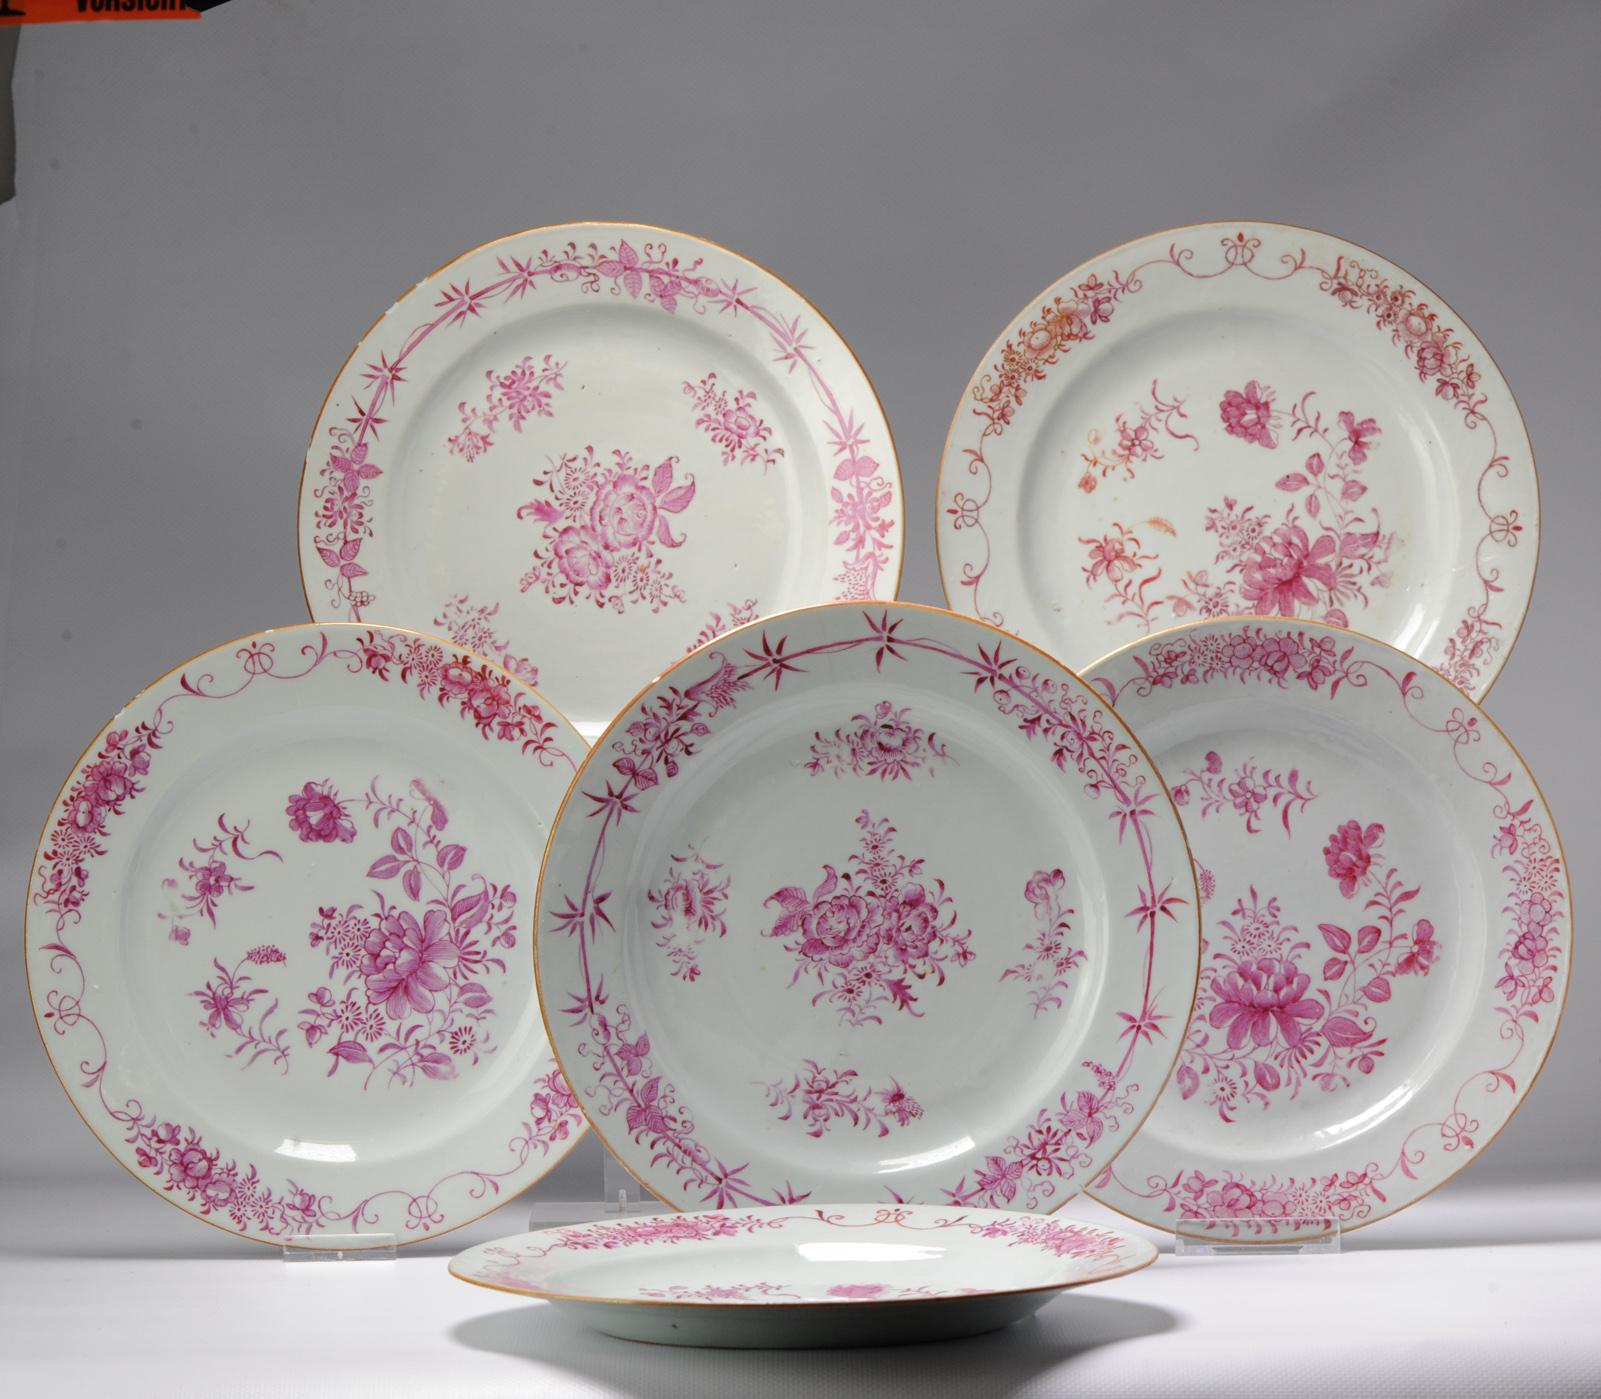 #5 Antique Chinese Porcelain 18th C Qianlong Period Famille Rose Dinner Plates For Sale 3